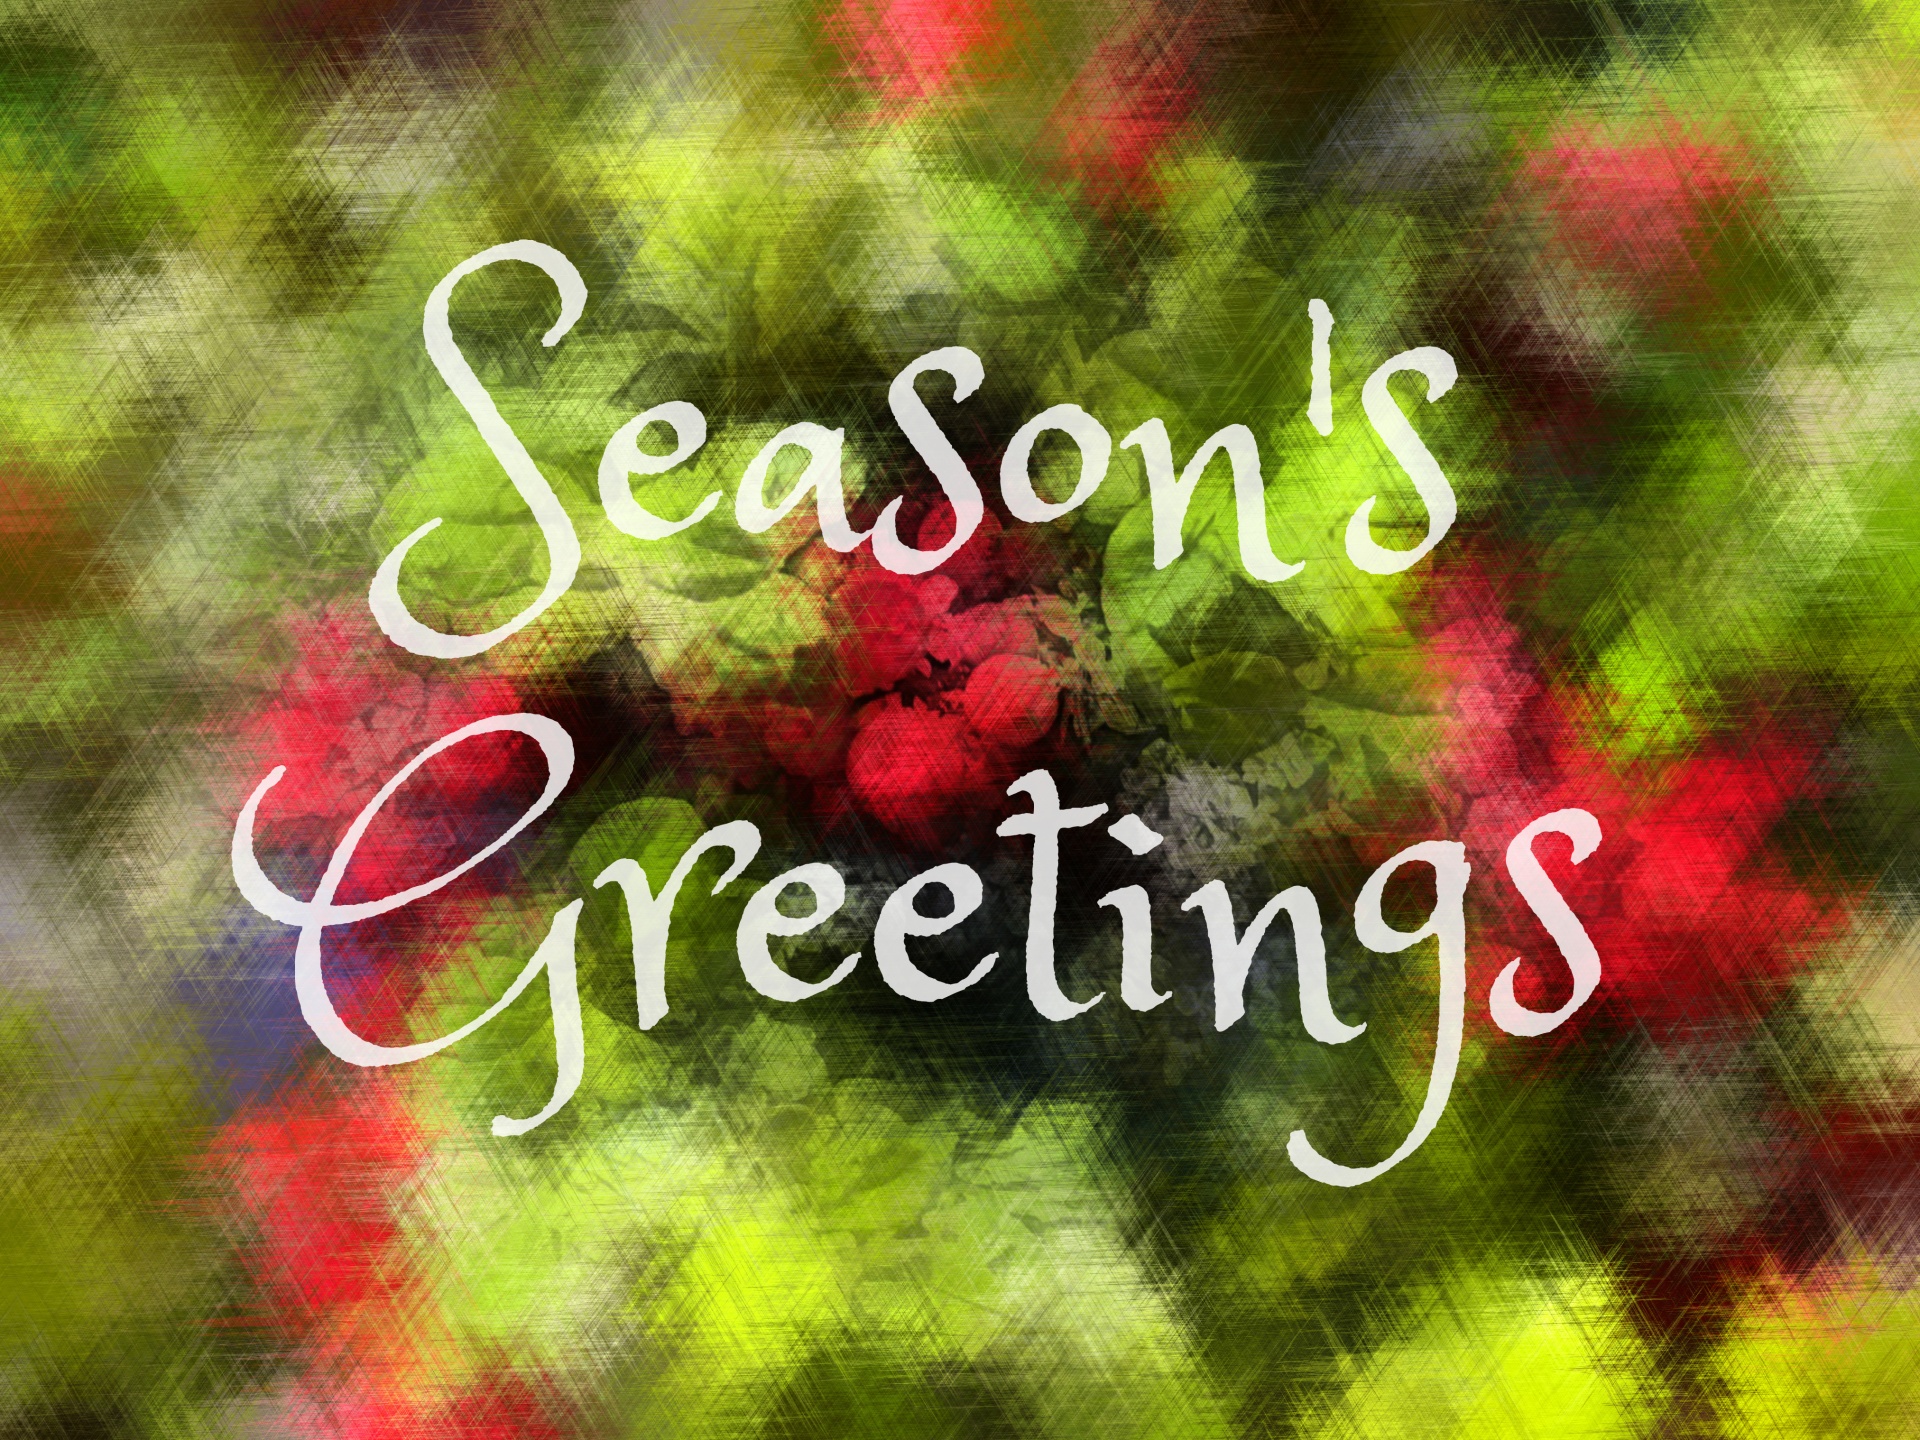 christmas-greeting-card-with-calligraphic-season-wishes-on-yellow-images-creative-store